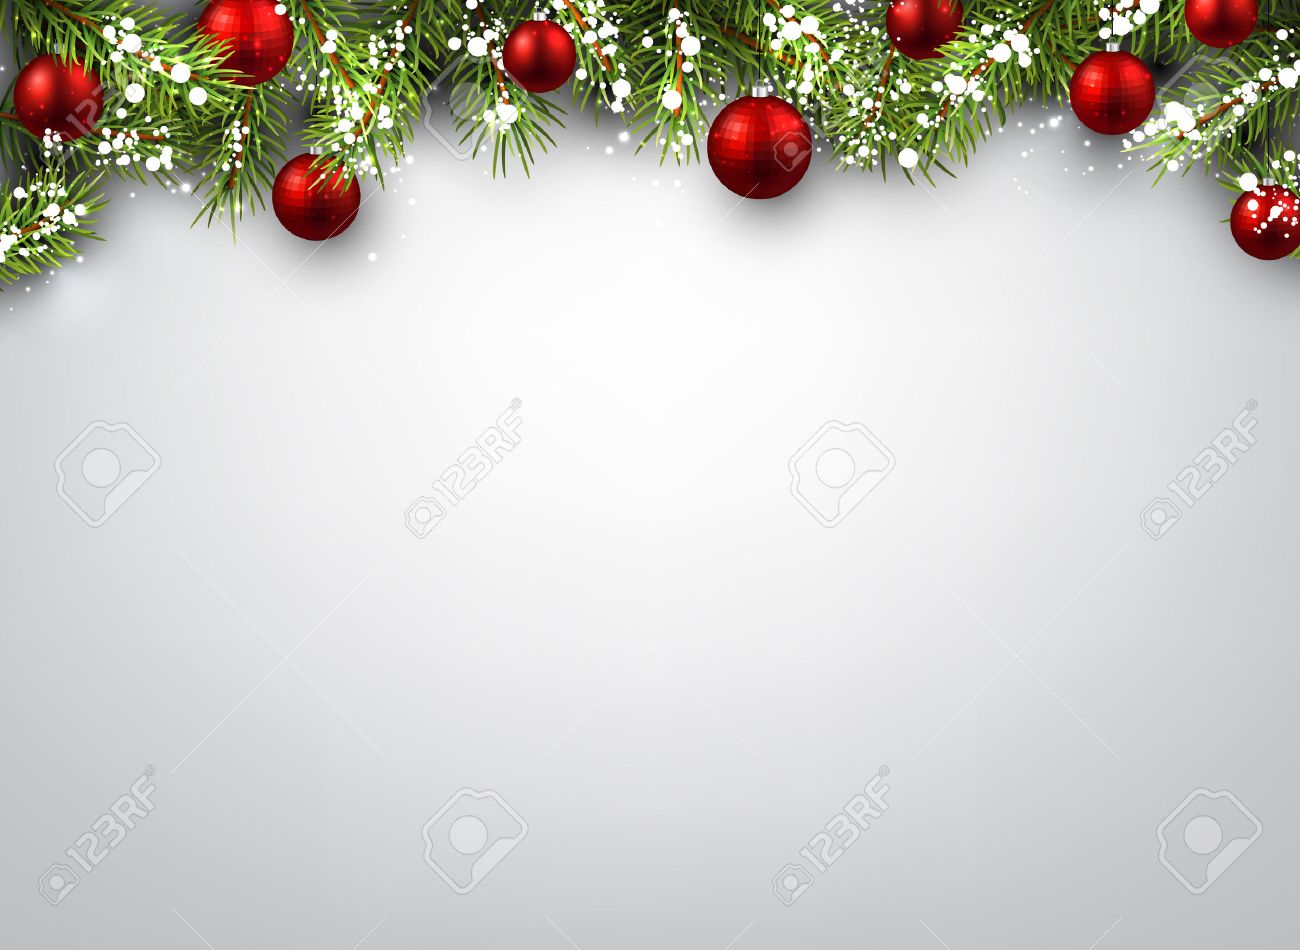 Christmas Background With Fir Branches And Red Balls Royalty